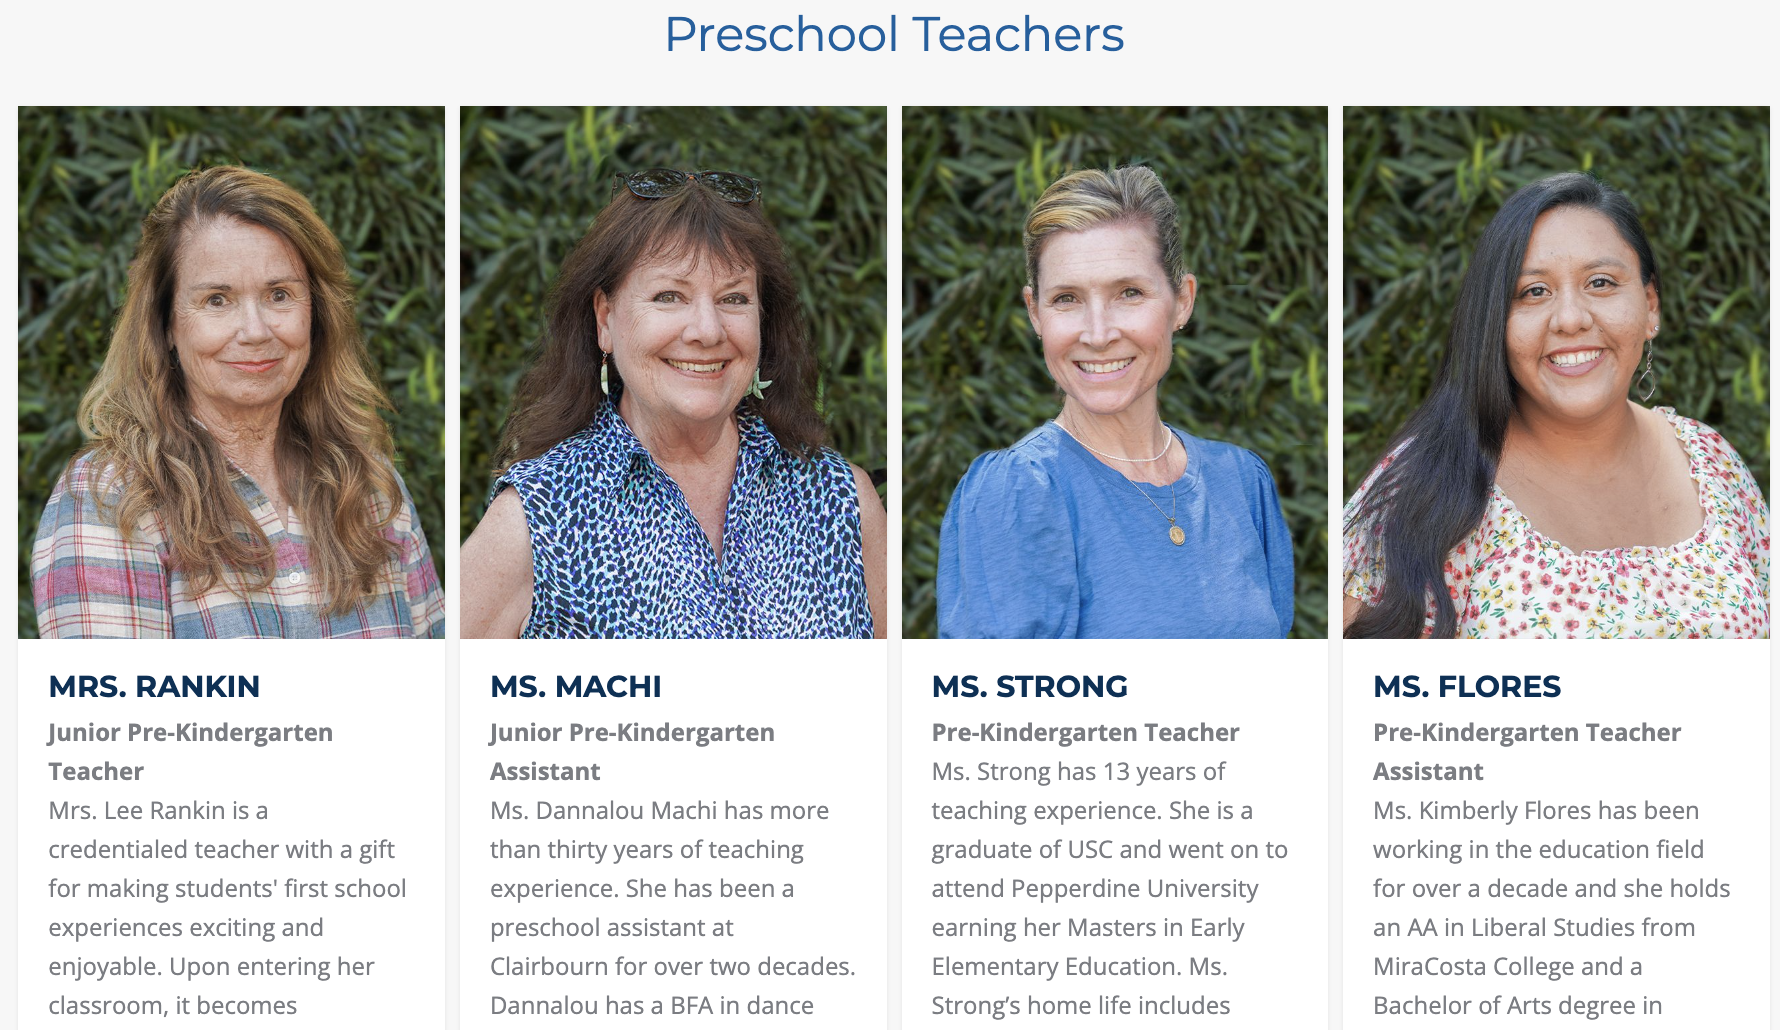 faculty profiles for teachers at clairbourn school in california